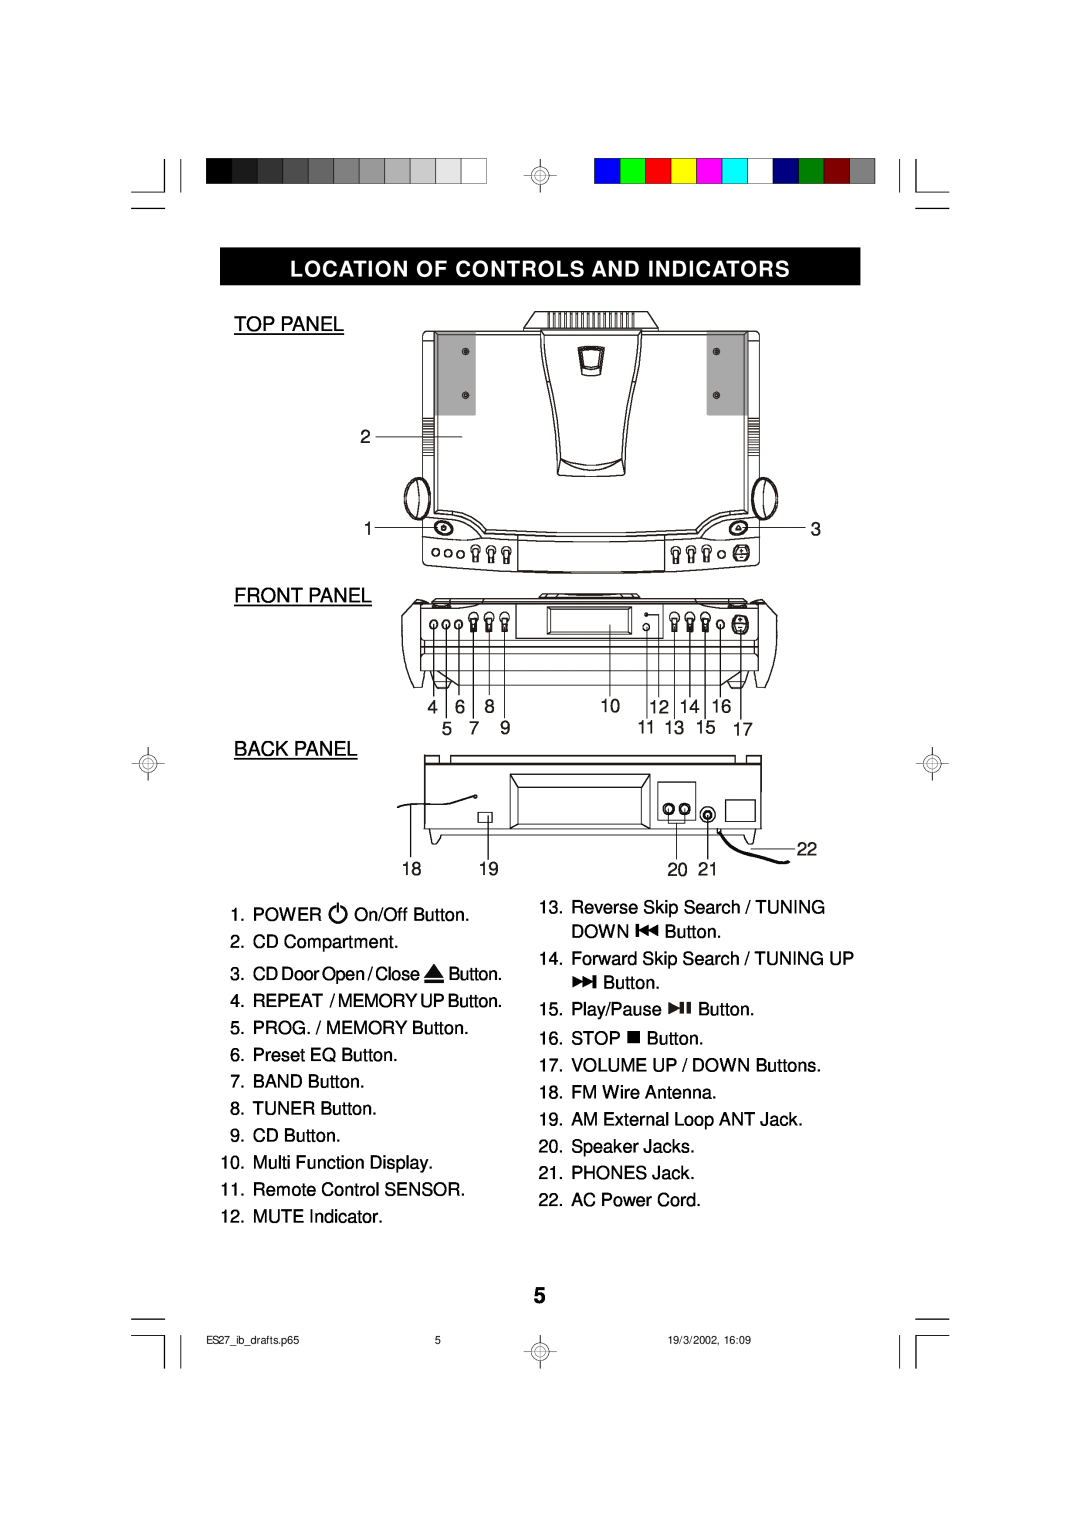 Emerson ES27 owner manual Location Of Controls And Indicators, Top Panel, Front Panel Back Panel 